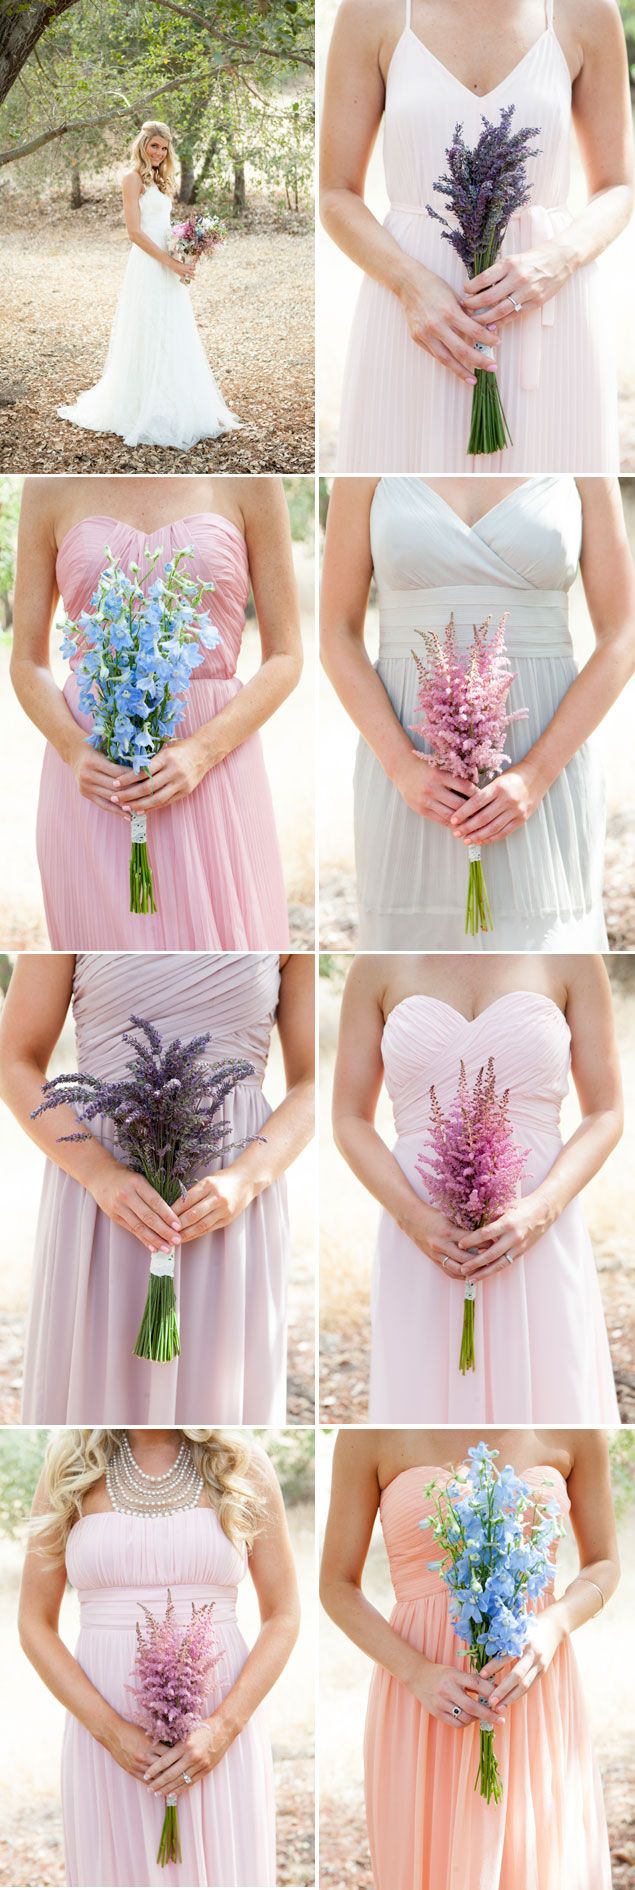 Mix-matched Bridesmaid Bouquets in Pastels PHOTO SOURCE • KRISTEN BEINKE PHOTO...